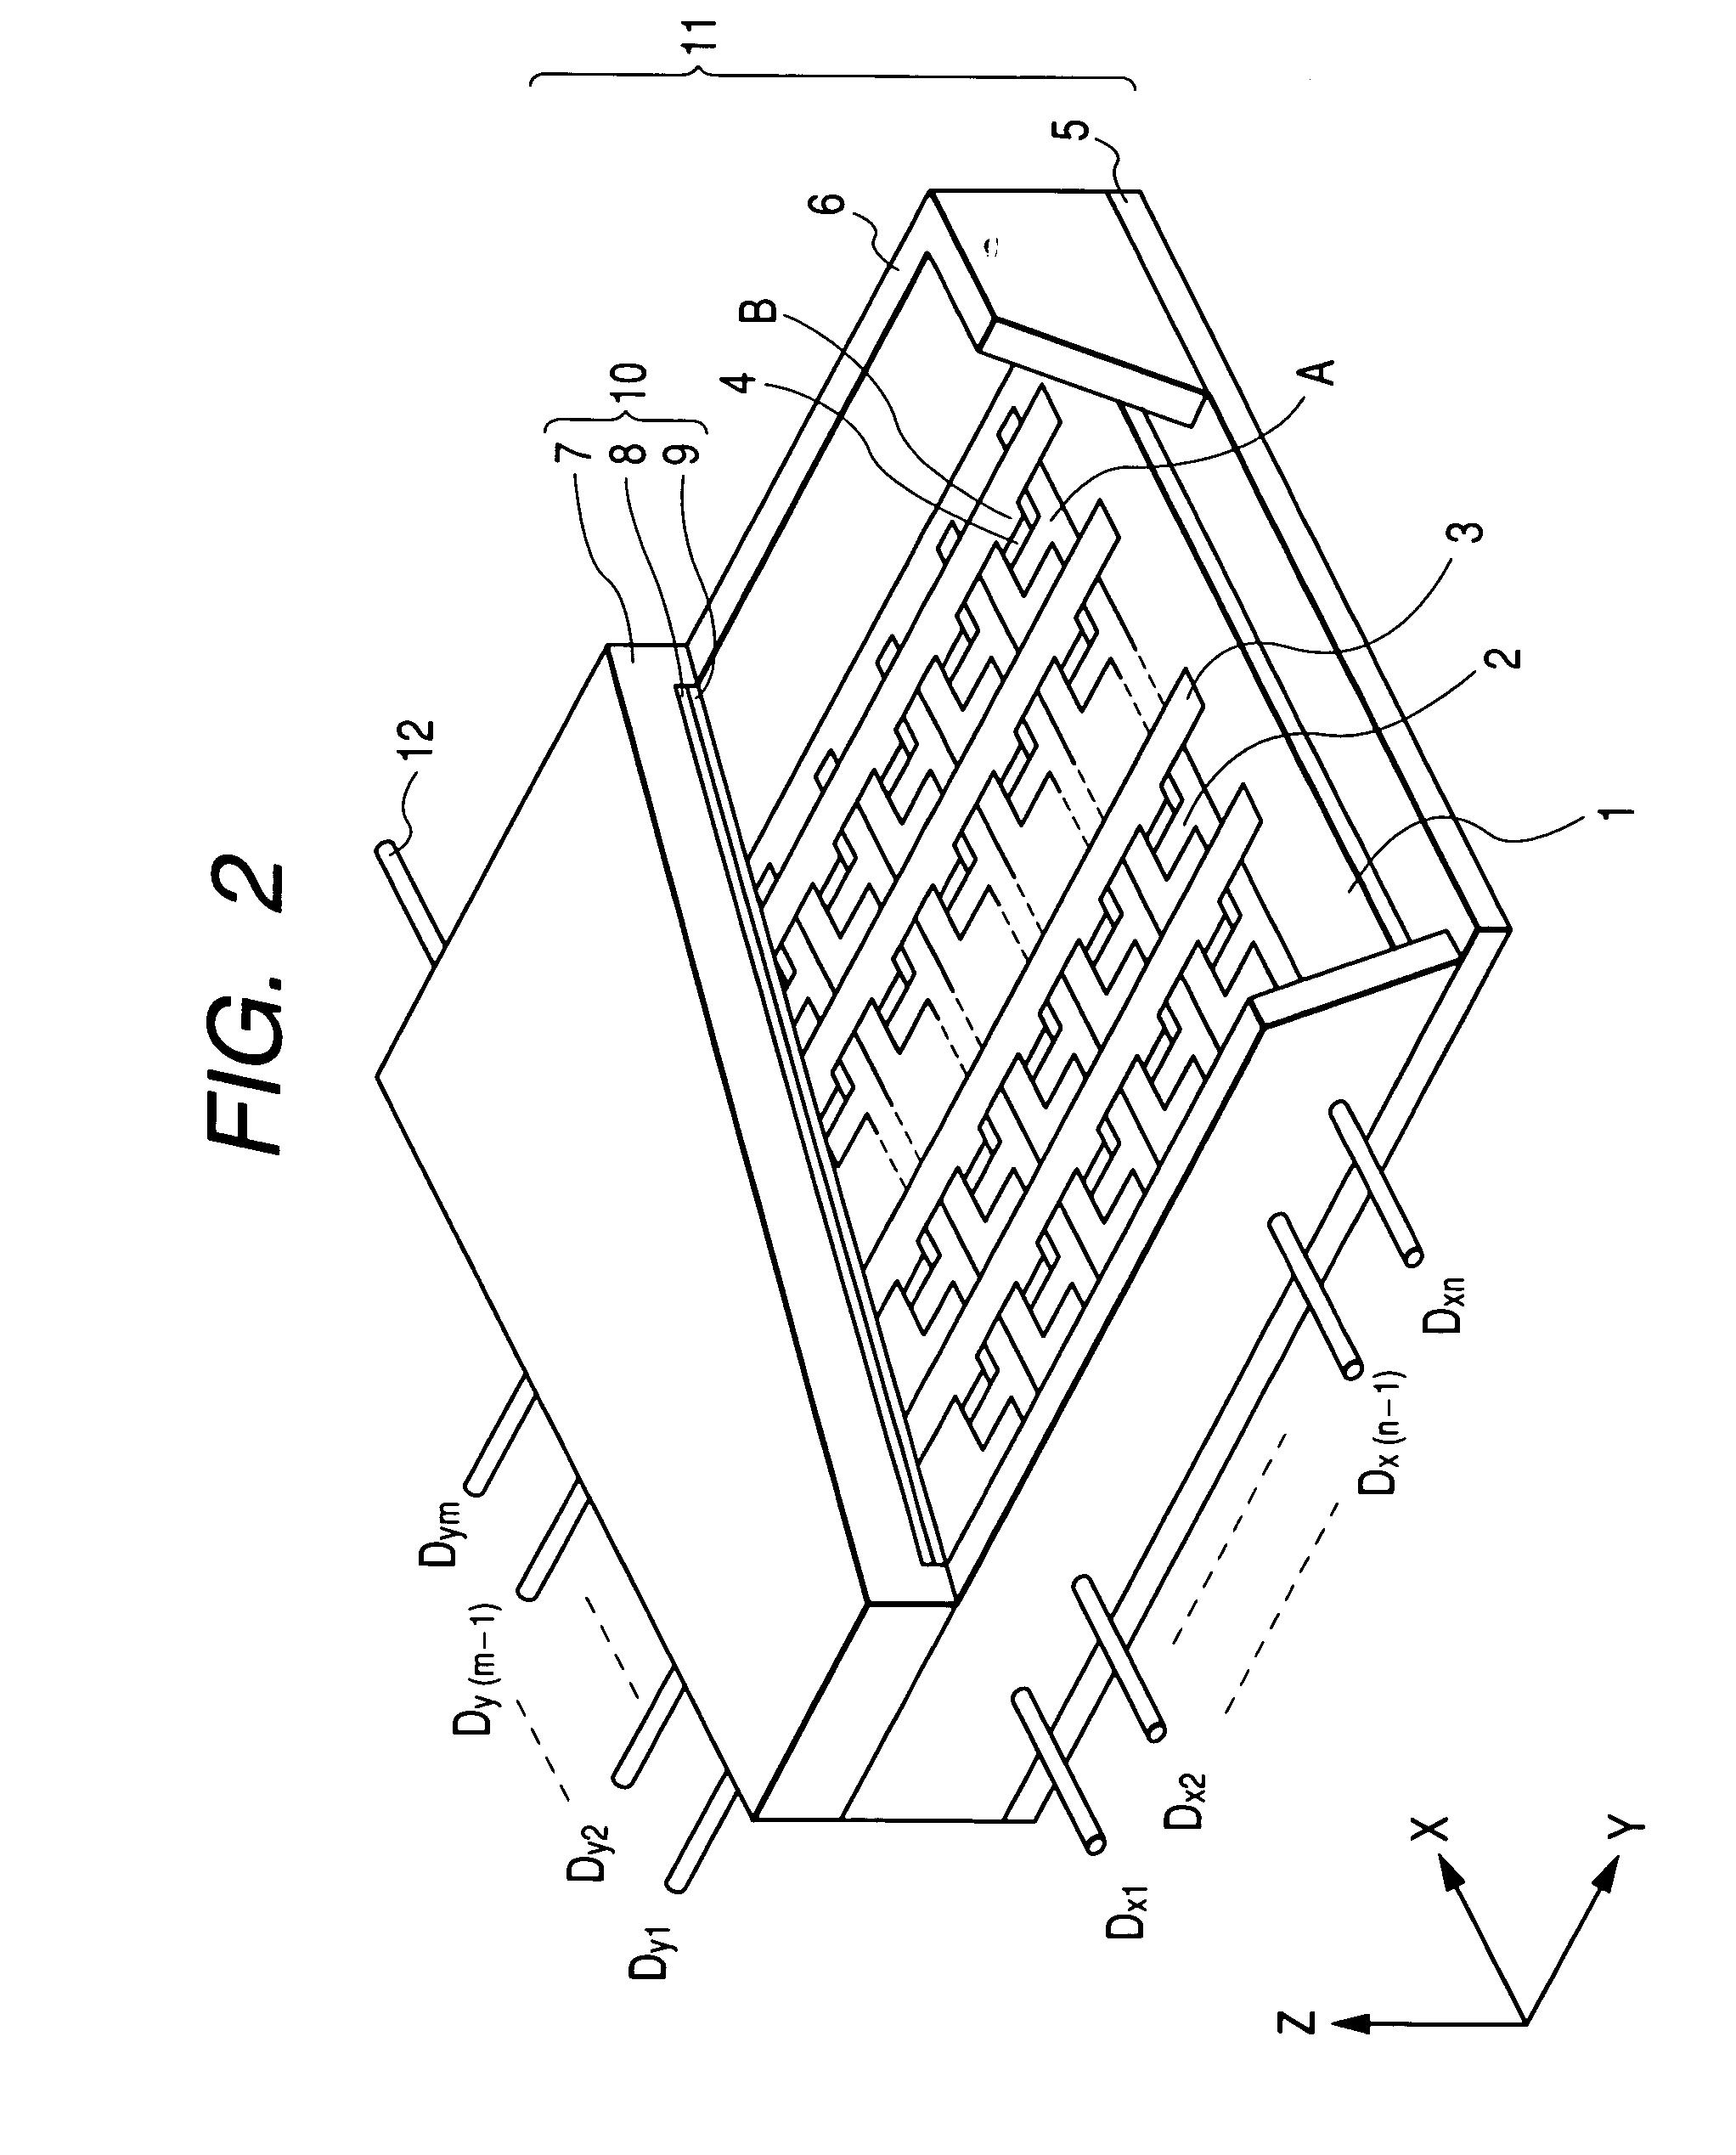 Base pattern forming material for electrode and wiring material absorption, electrode and wiring forming method, and method of manufacturing image forming apparatus